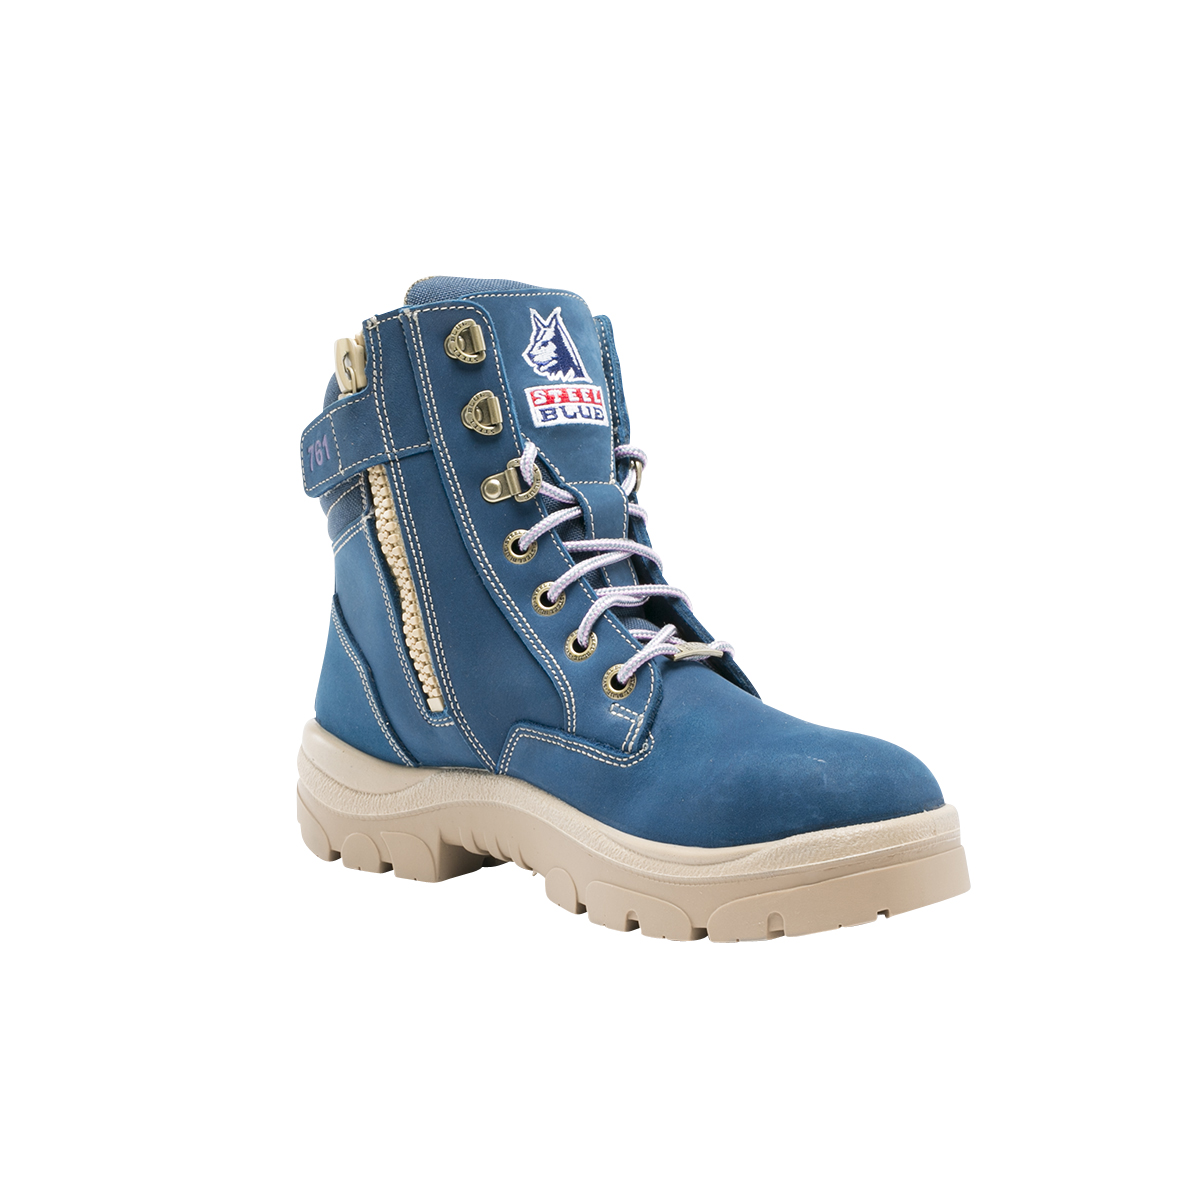 BOOT LADIES S/X BEYOND BLUE ZIP S10 LIMITED EDITION